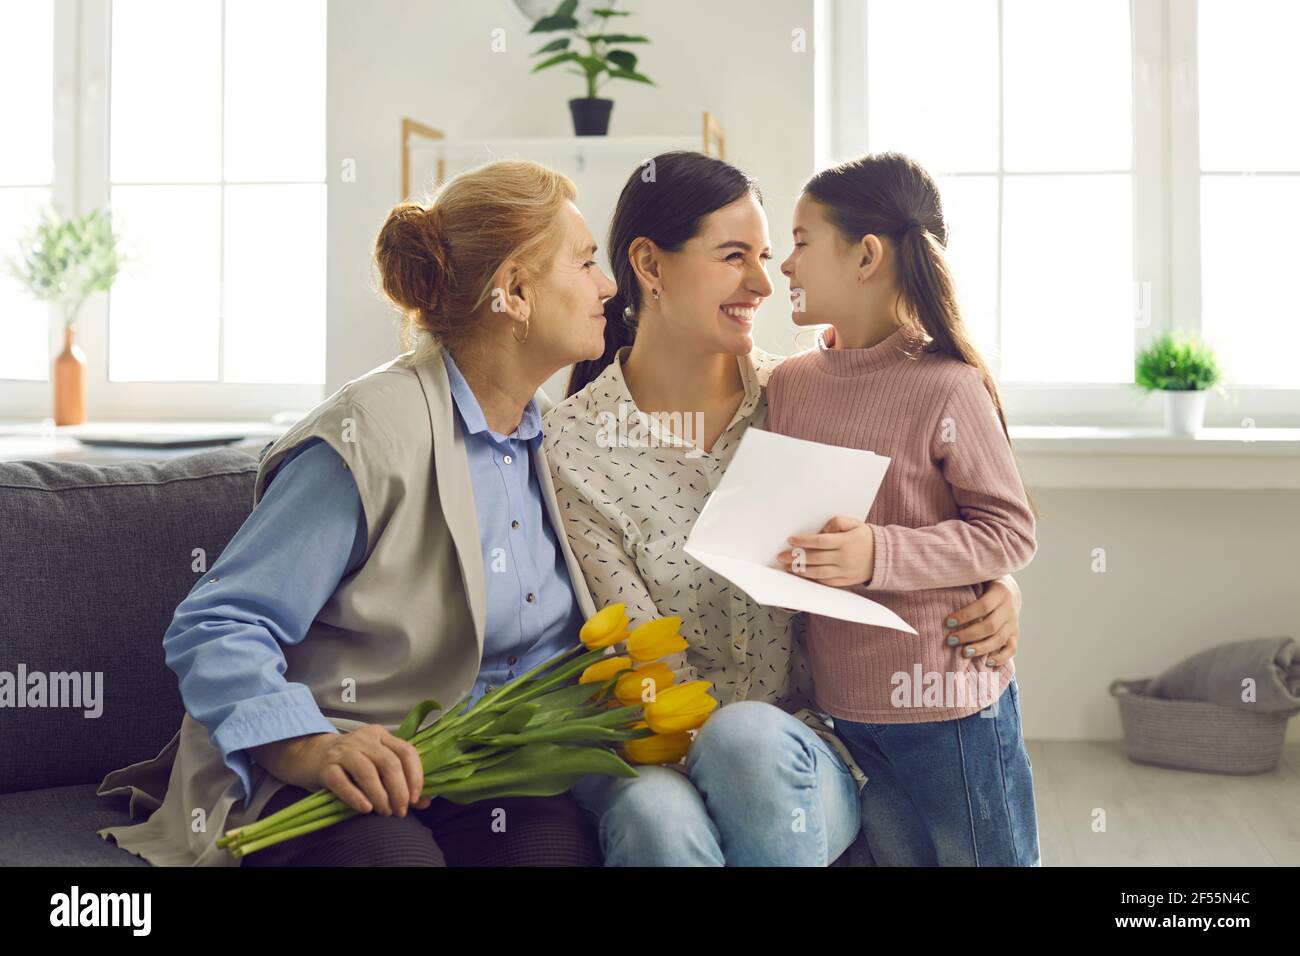 Little girl congratulates her mother and grandmother on the holiday by giving them gifts. Stock Photo